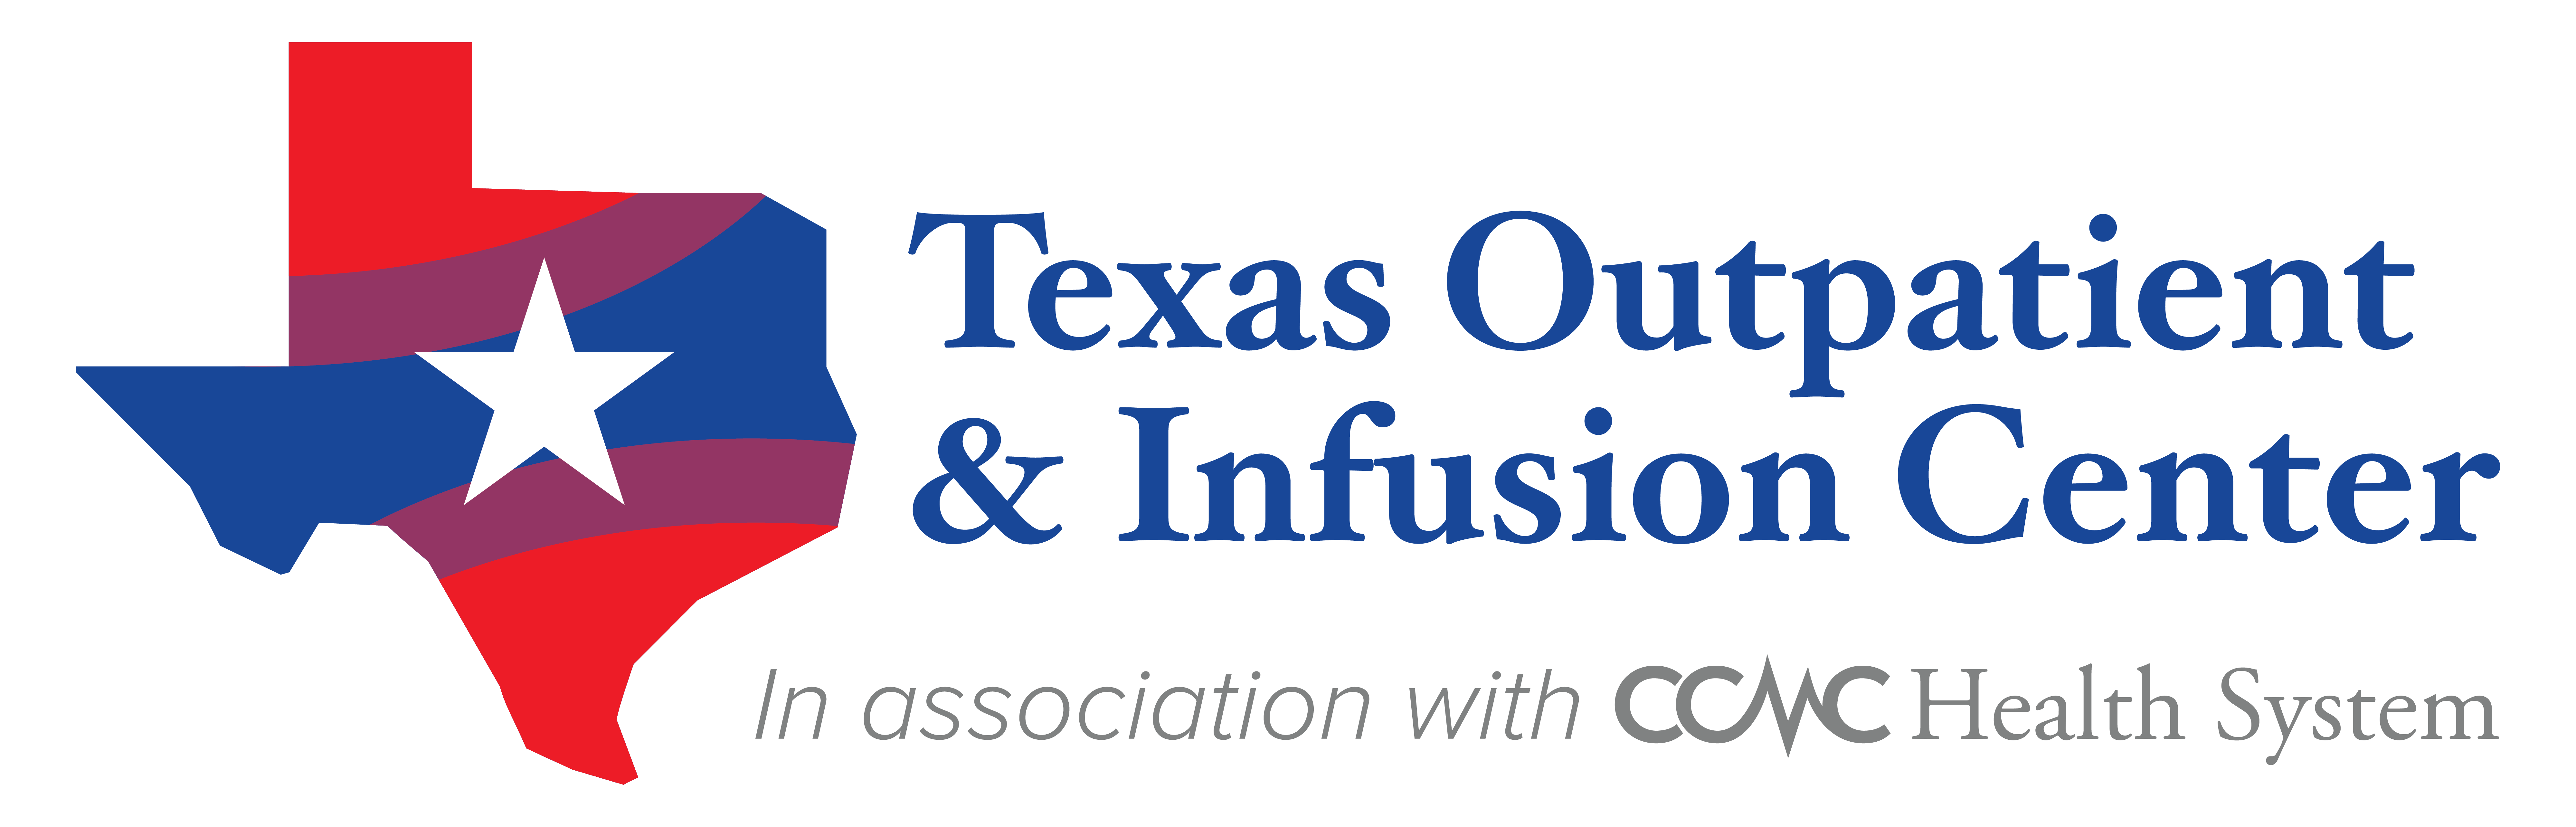 Texas Outpatient & Infusion Center - In association with CCMC Health System Logo